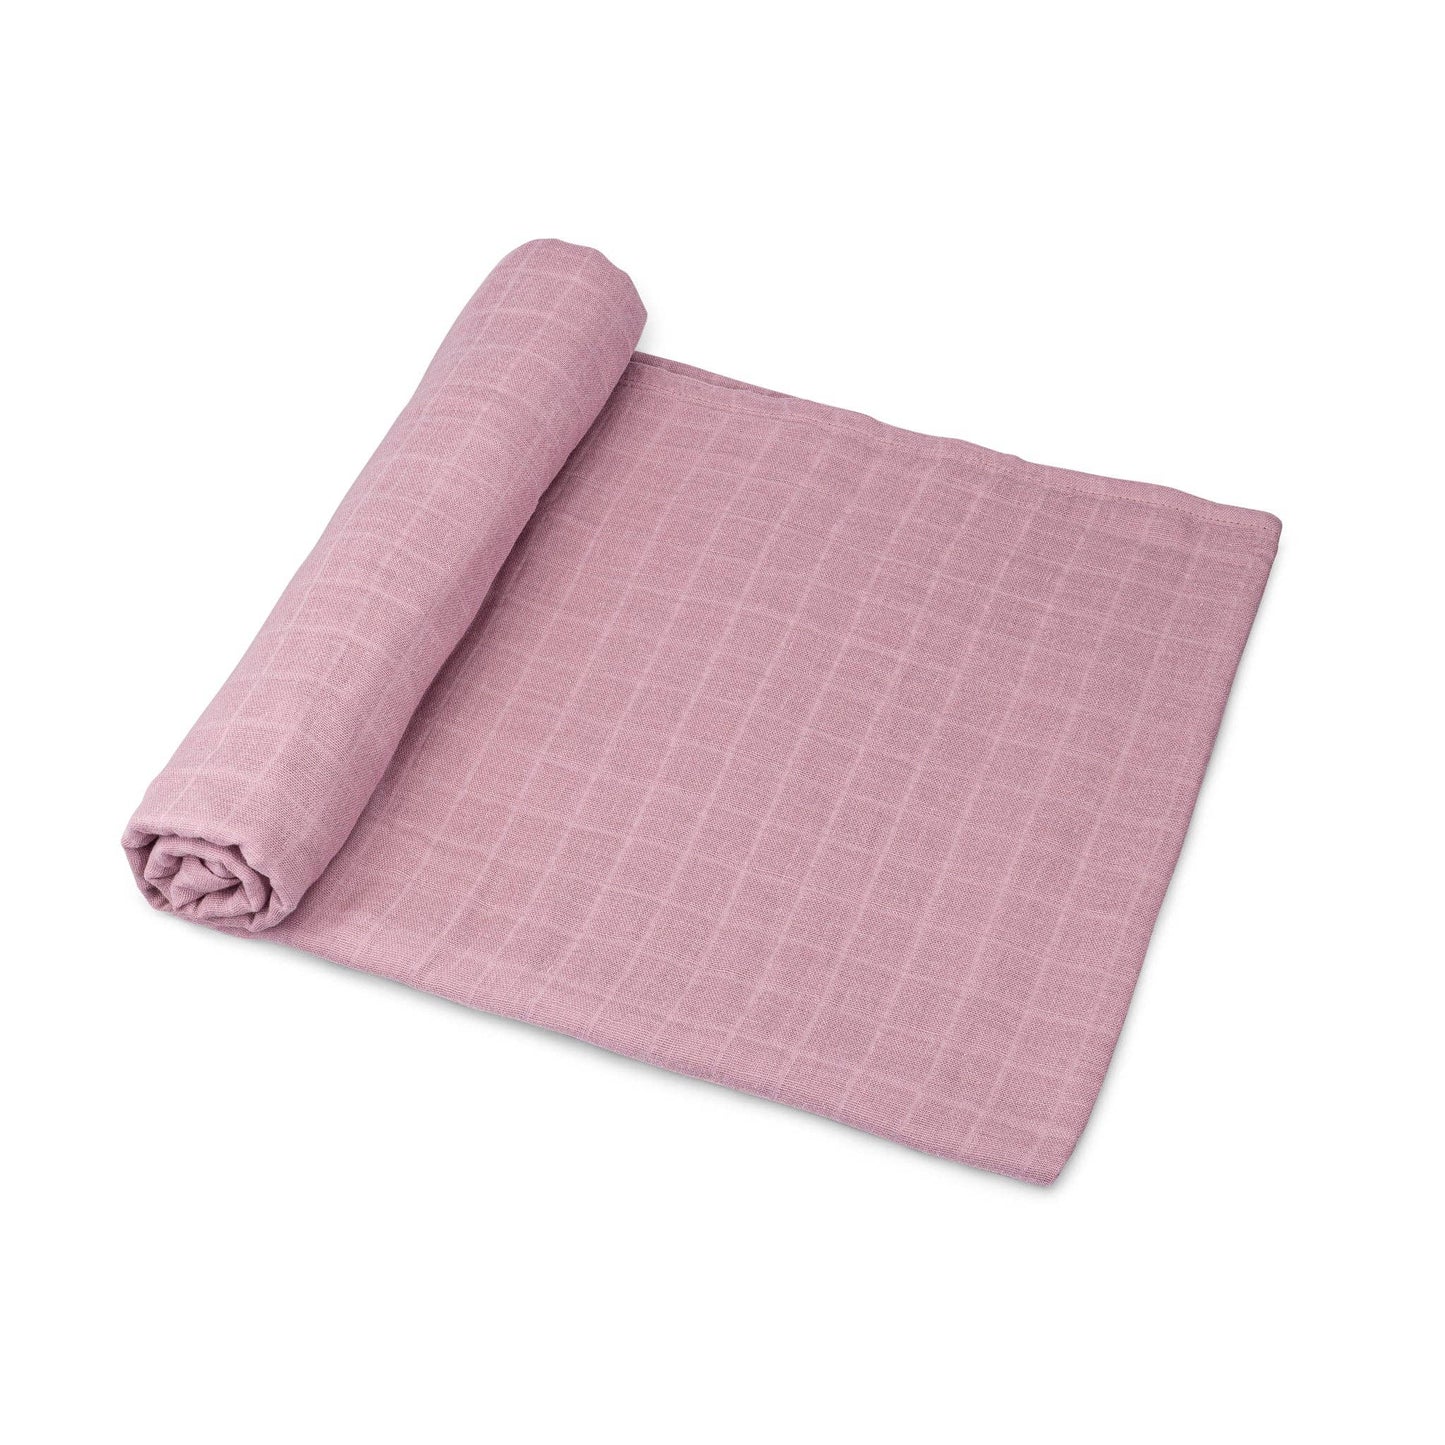 Organic Cotton Muslin Swaddle Blanket in Mauve